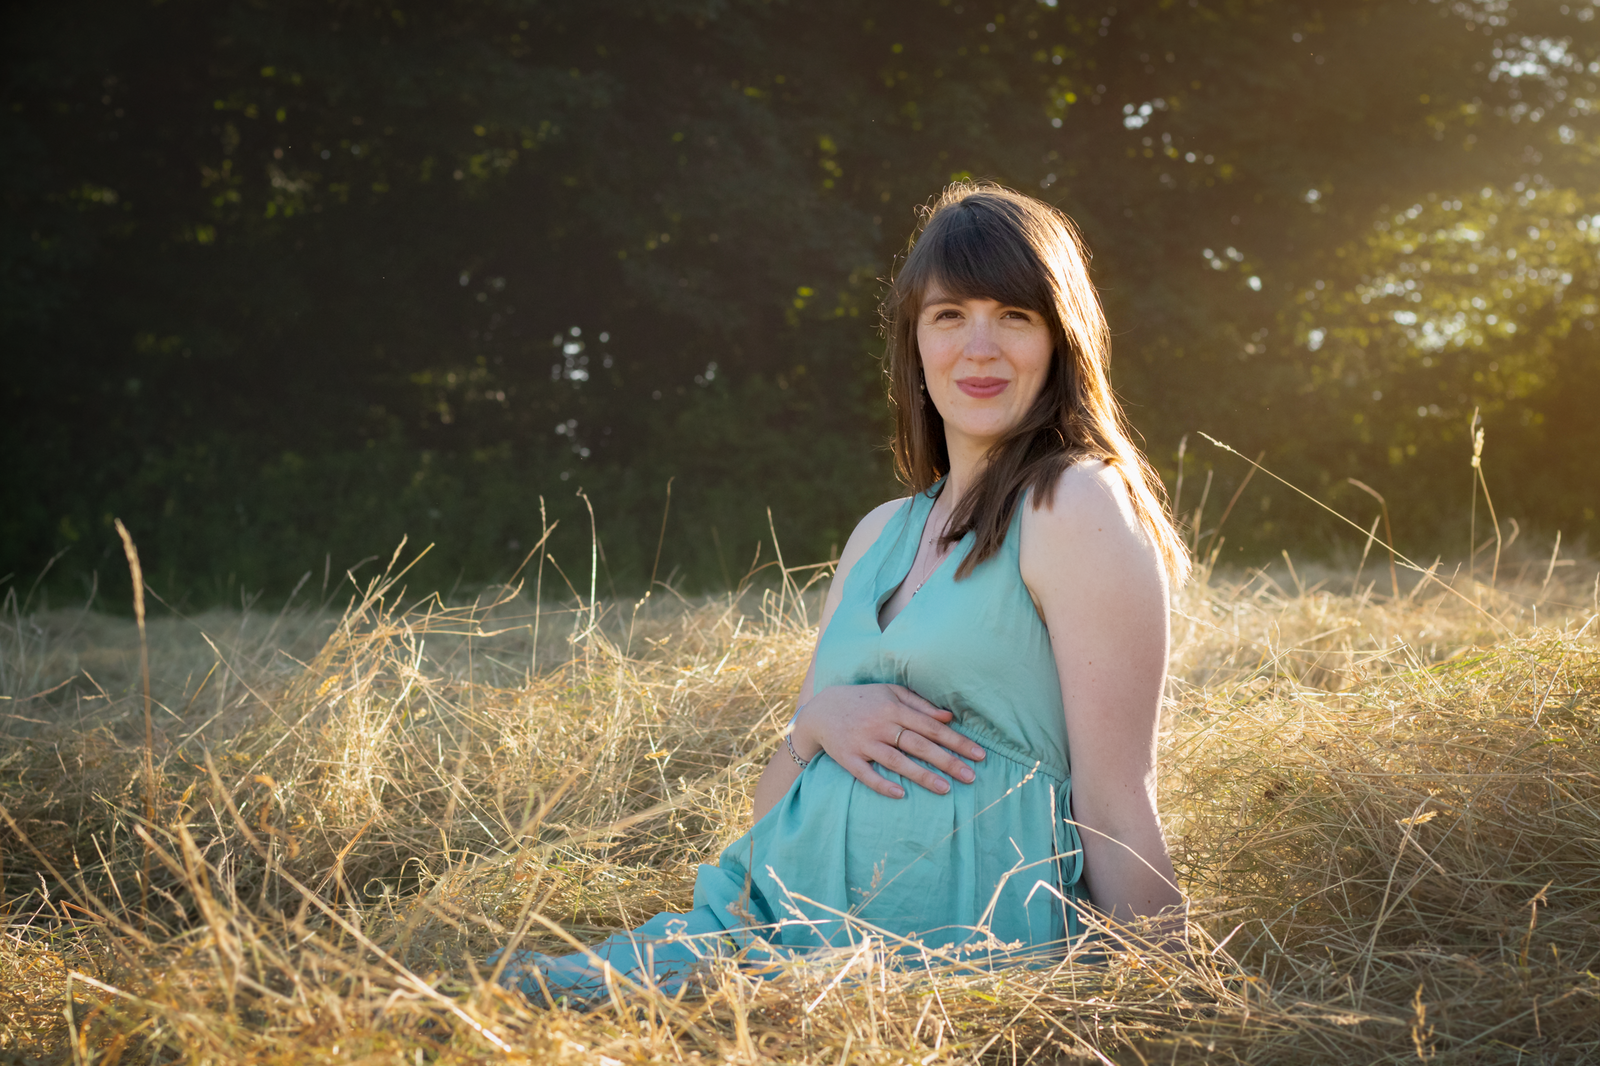 Mum to be in blue dress sits for maternity photography in field of hay